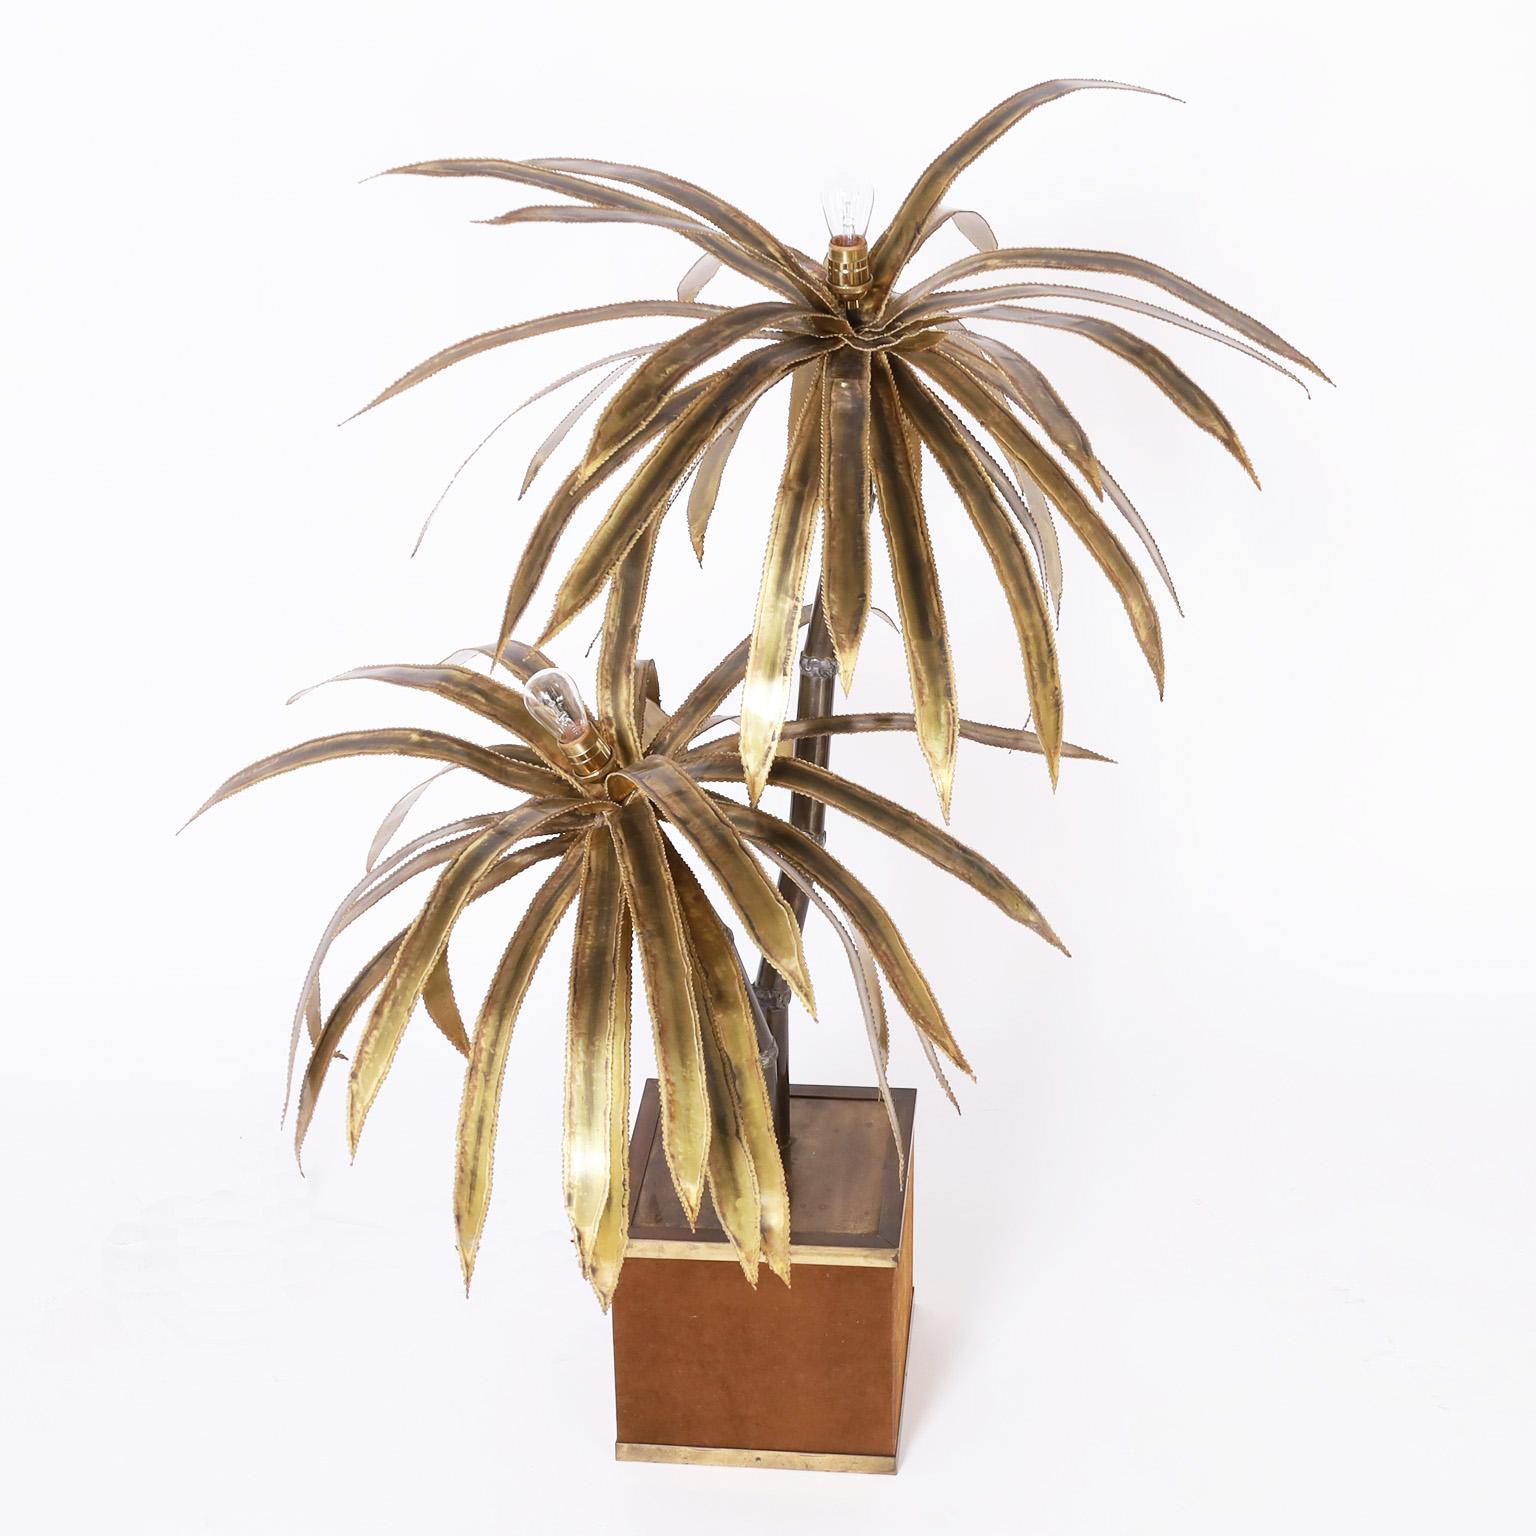 Striking mid-century palm tree sculpture with brutalist style leaves having lights at the tops on faux palm tree trunks in a square brass planter clad in brown velvet.